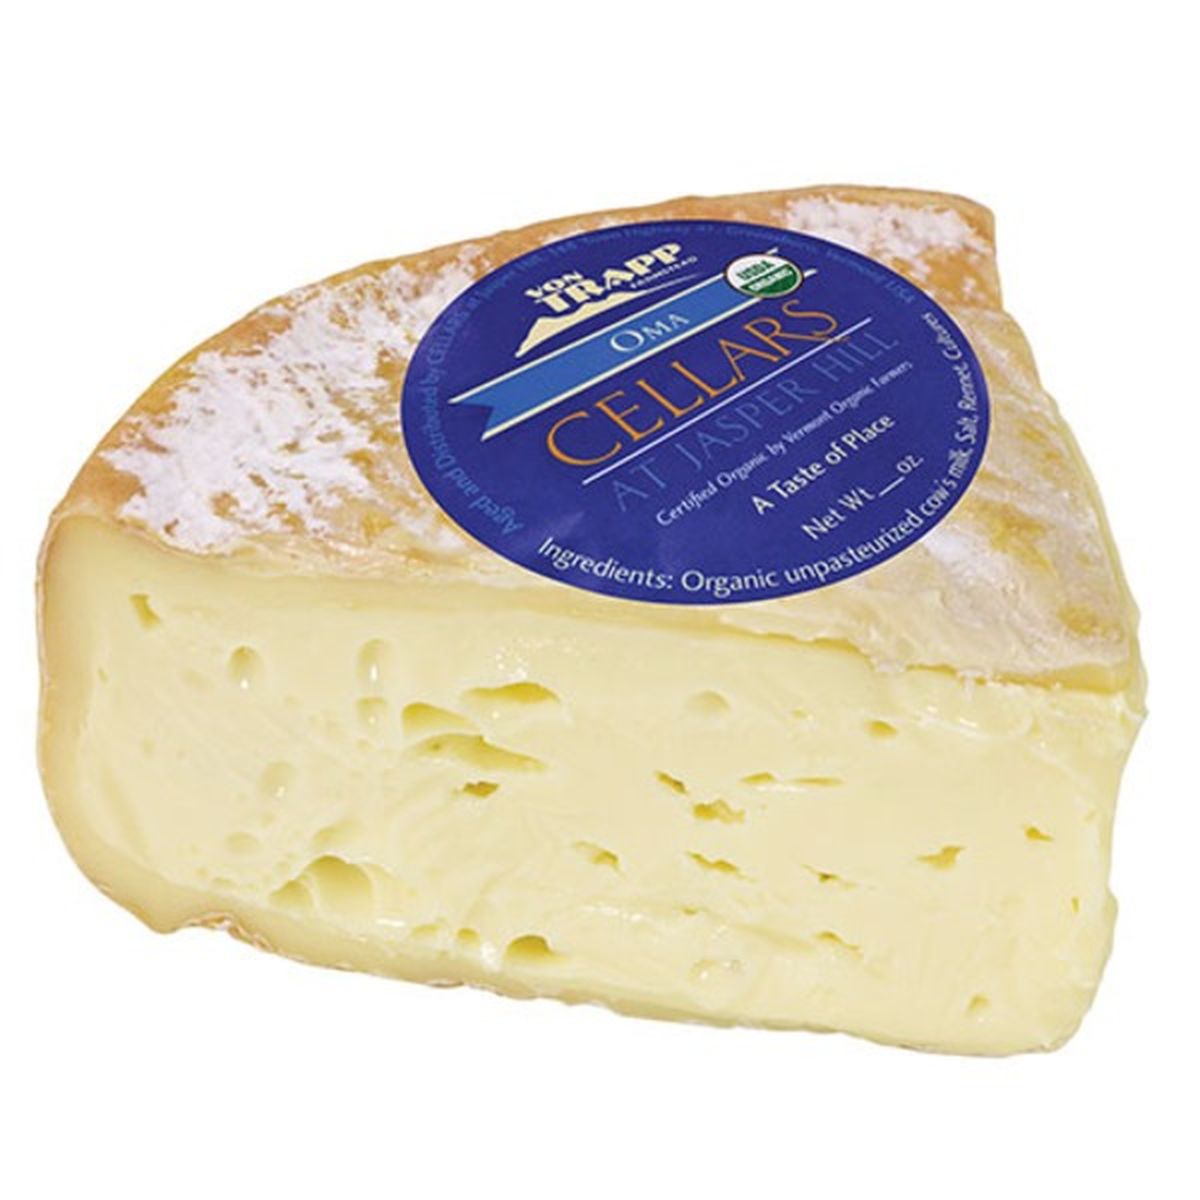 Calories in Oma Tomme Style Cheese